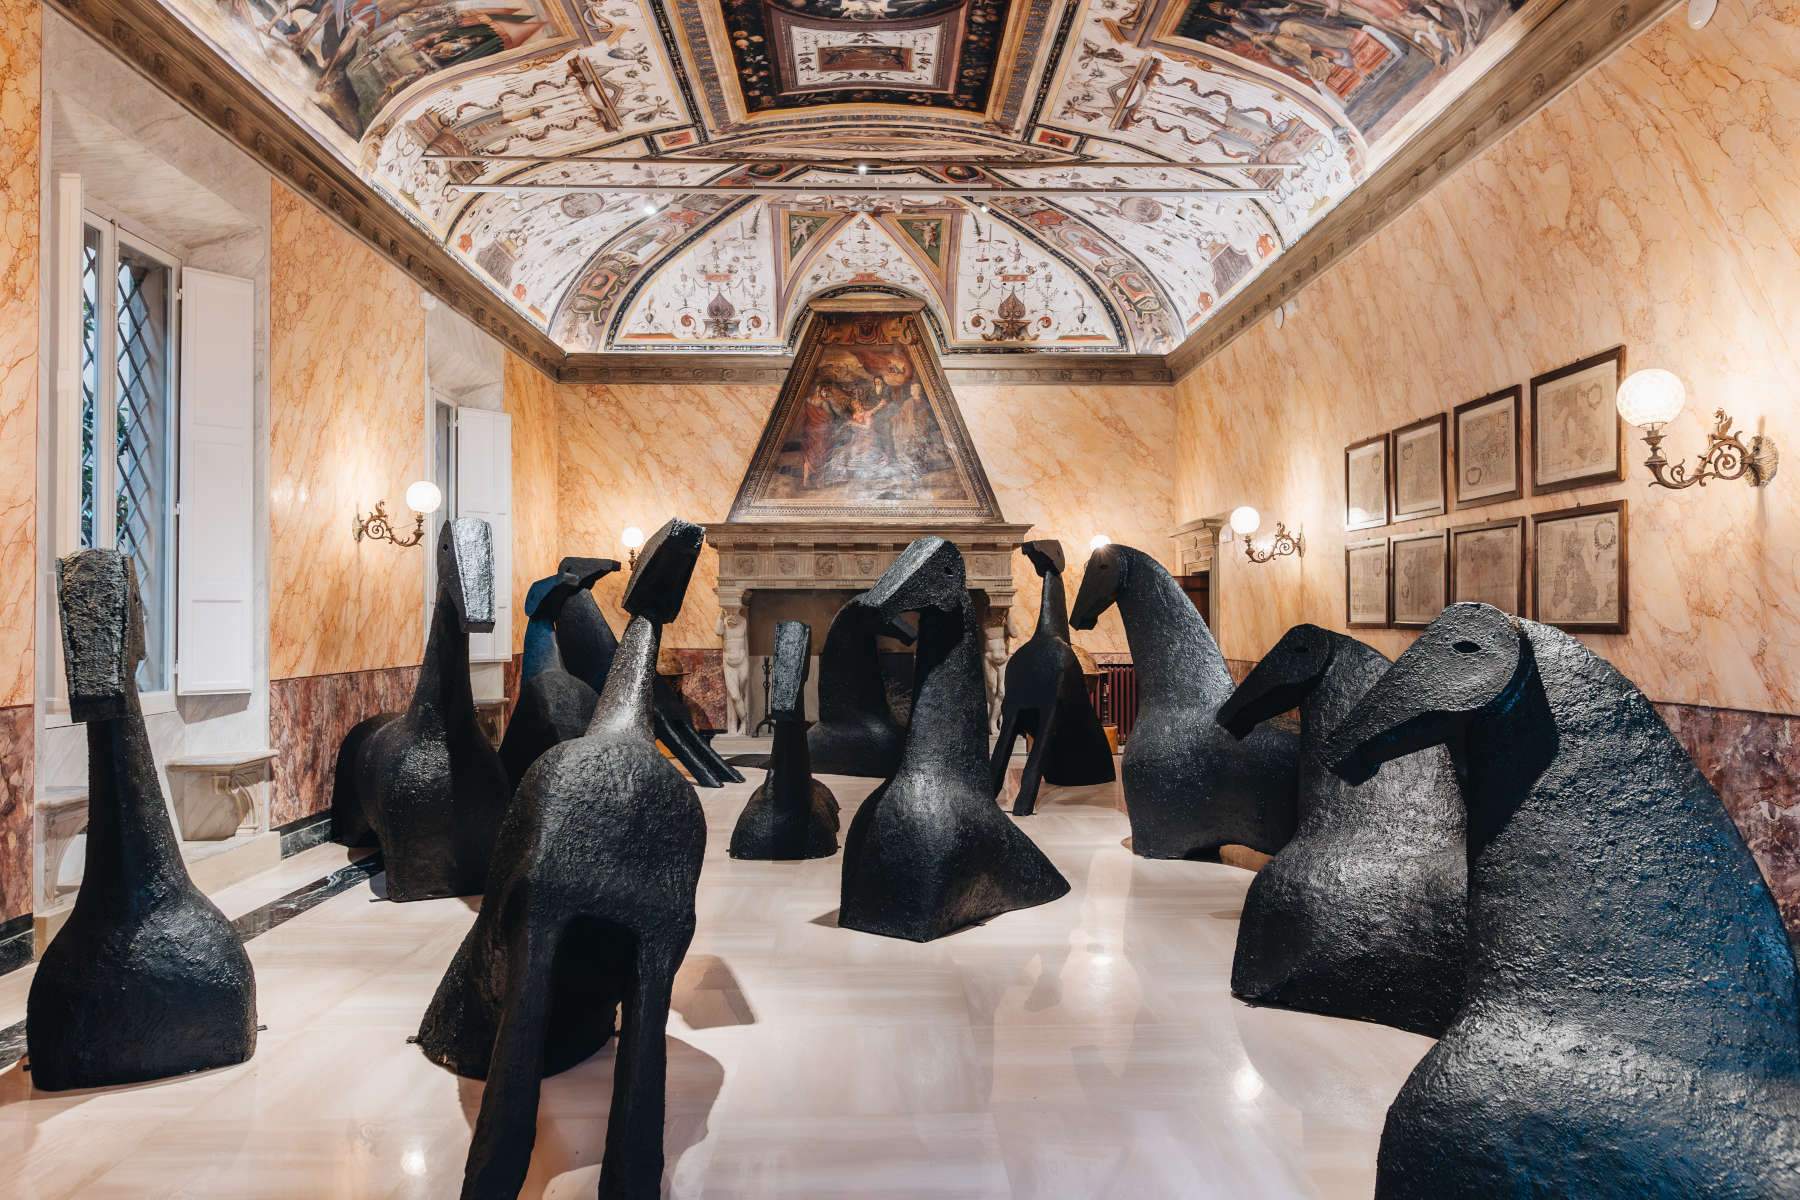 In Bologna, Mimmo Paladino's exhibition in the Palace of the Pope